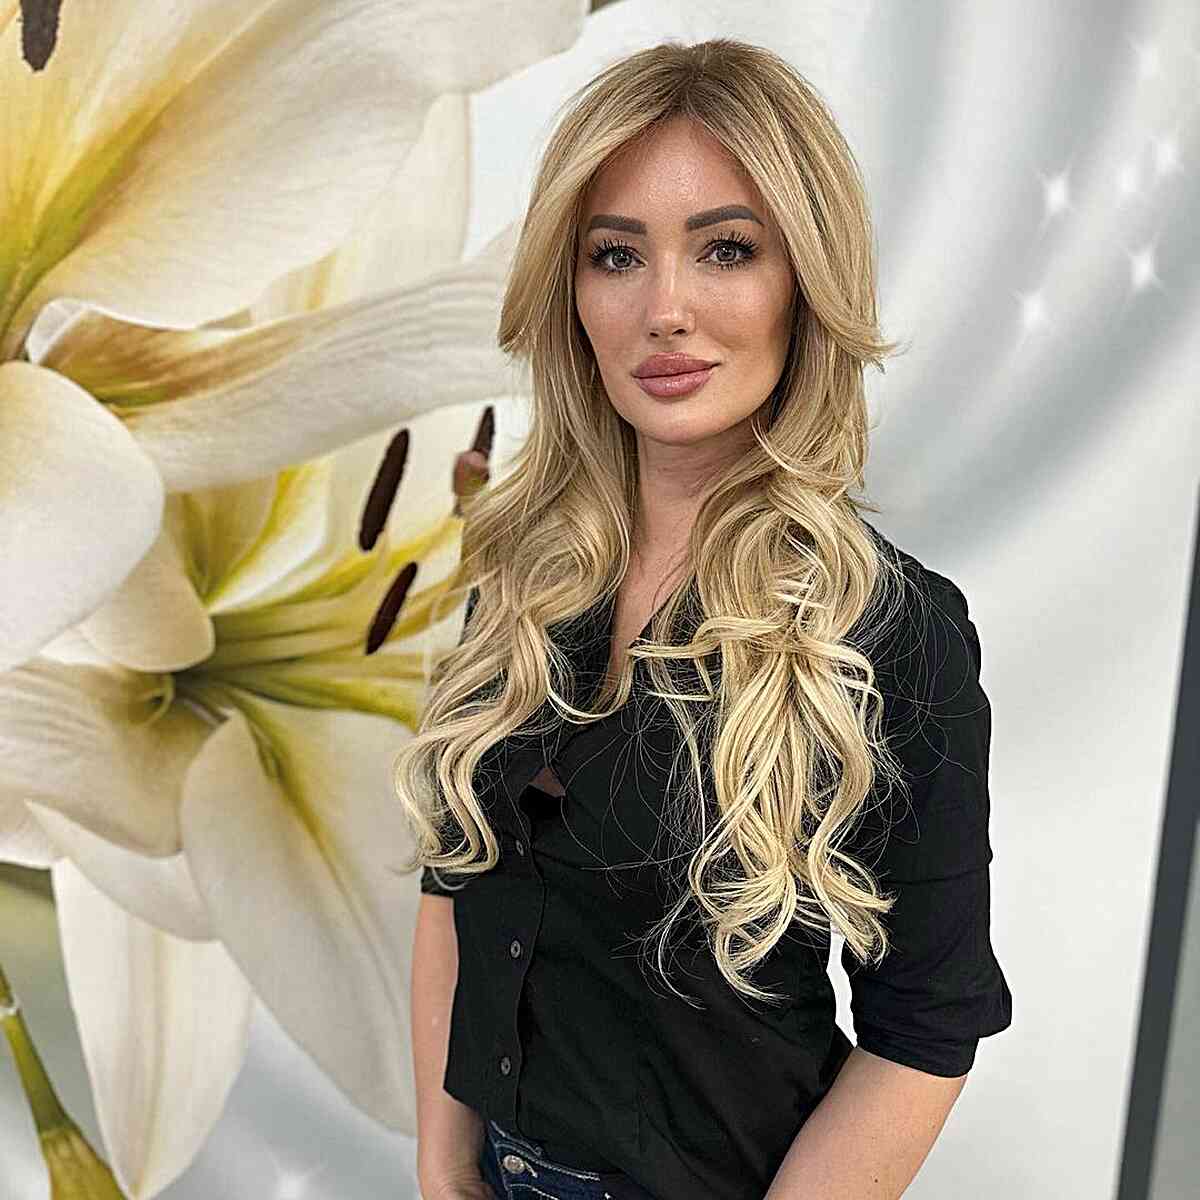 Modern Long Curtain Bangs for Long Hair with curled ends